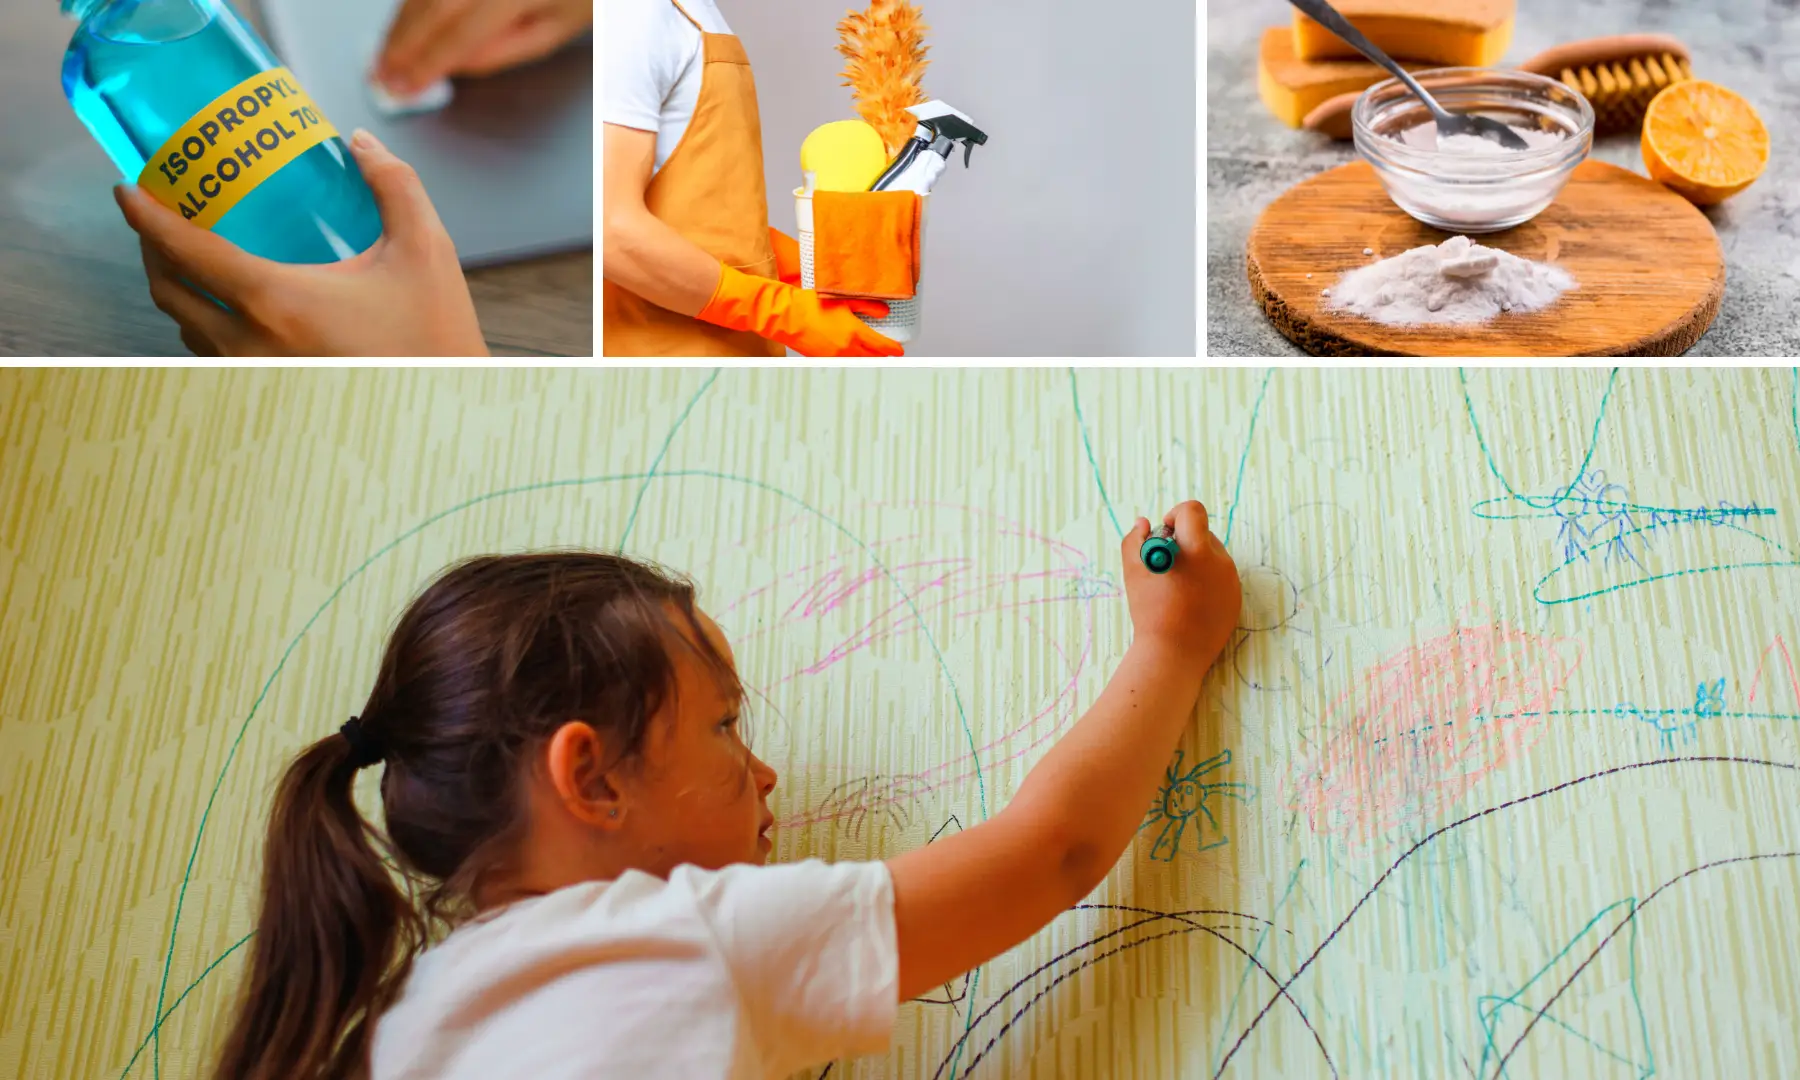 7 Cleaning Products To Remove Kids' Drawings From The Walls